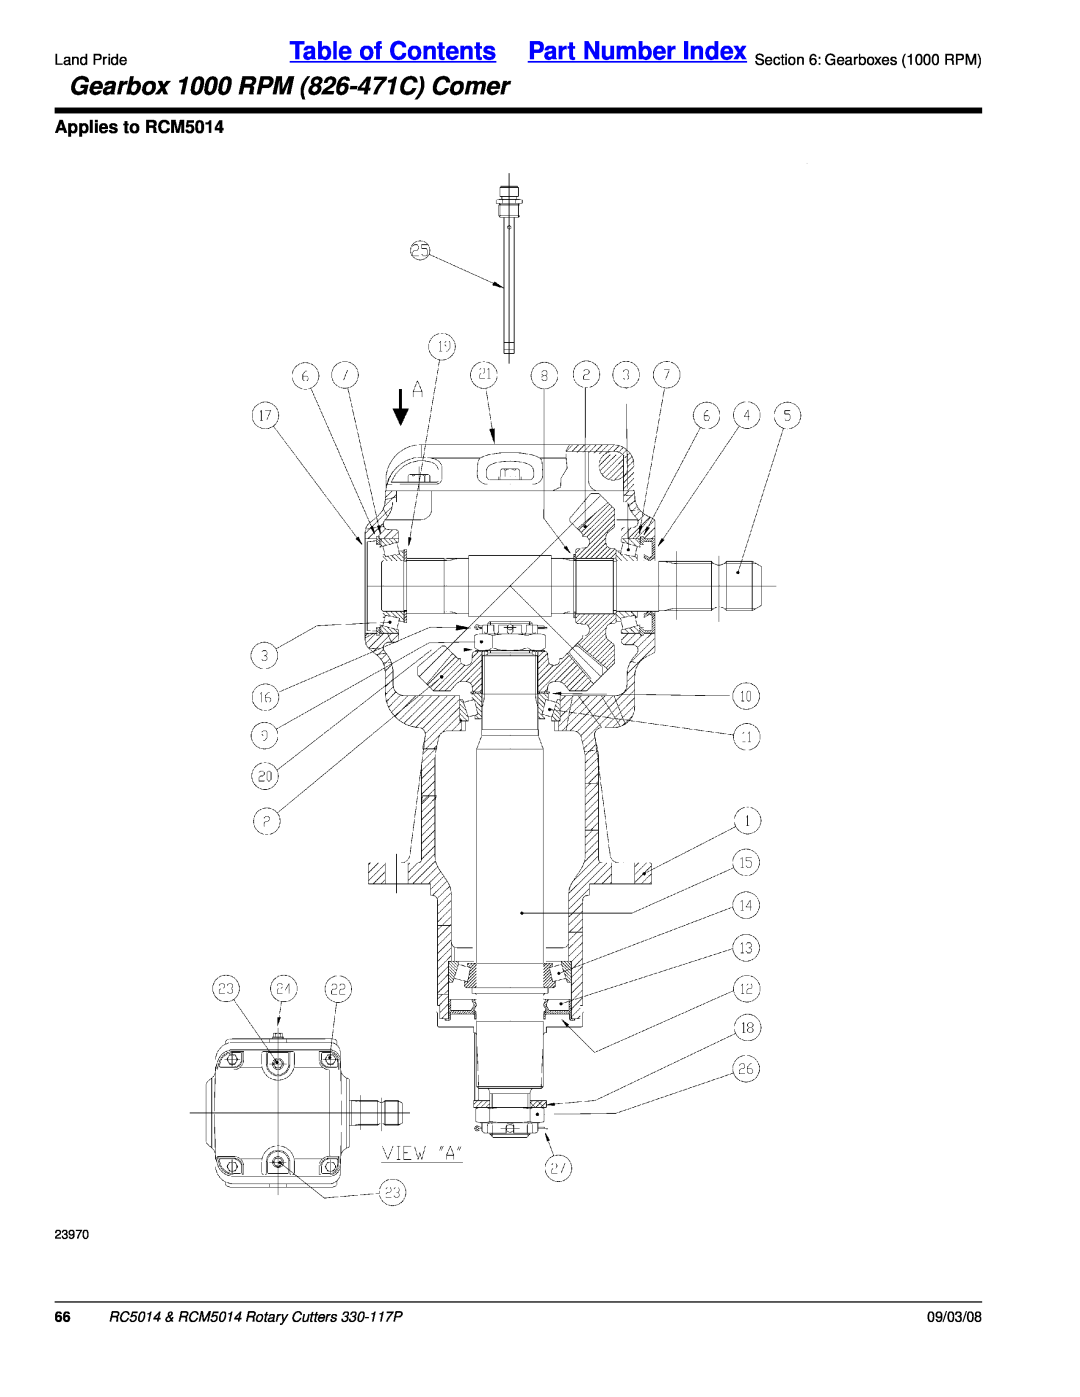 Land Pride manual Gearbox 1000 RPM 826-471CComer, Applies to RCM5014, RC5014 & RCM5014 Rotary Cutters 330-117P, 09/03/08 